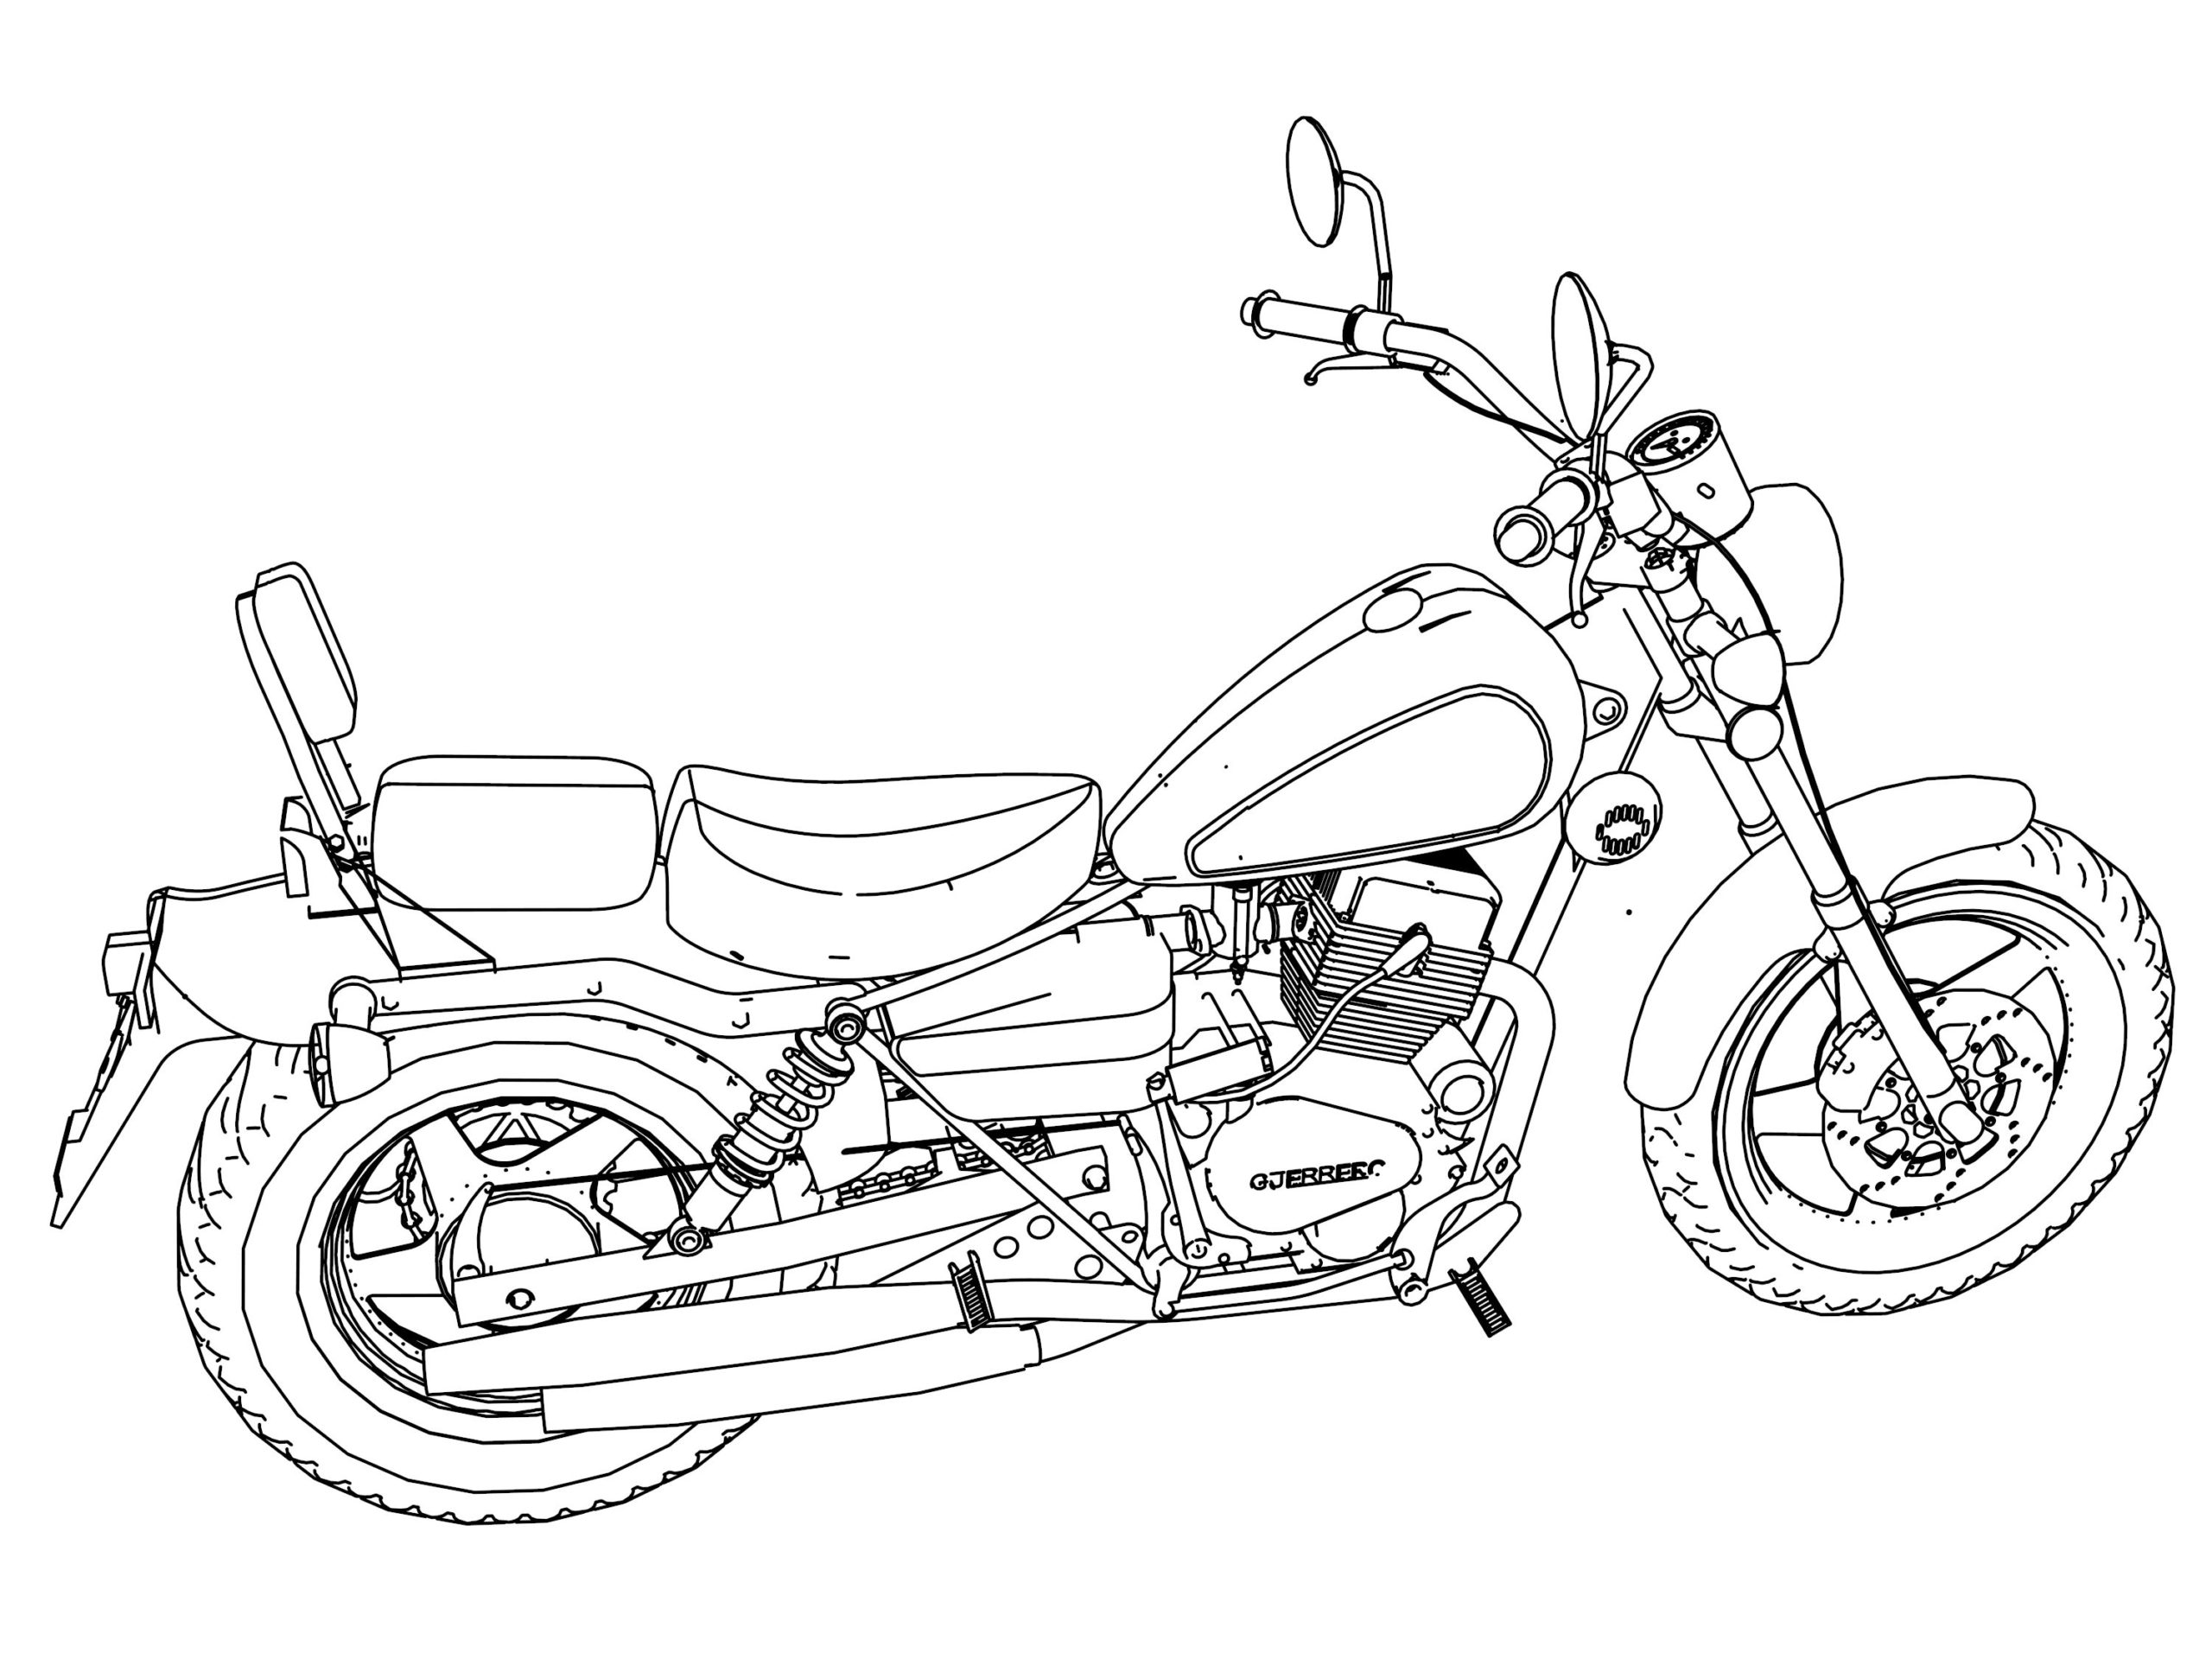 New Coloring Pages : Staggering Motorcycle Picture ...